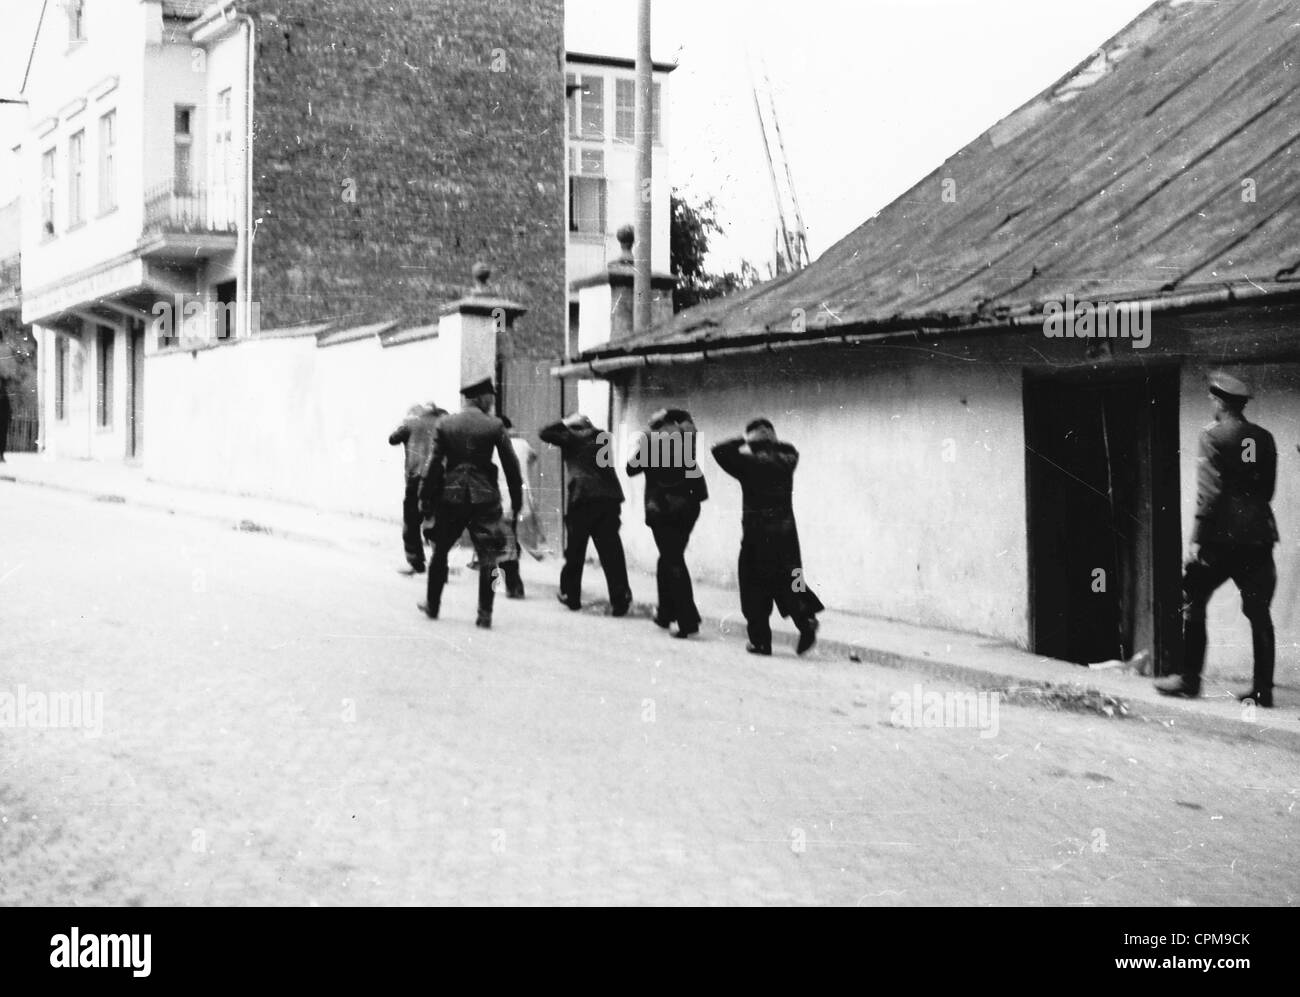 A group of Jews arrested by two German officers, Myslenice, Poland, 1939 (b/w photo) Stock Photo